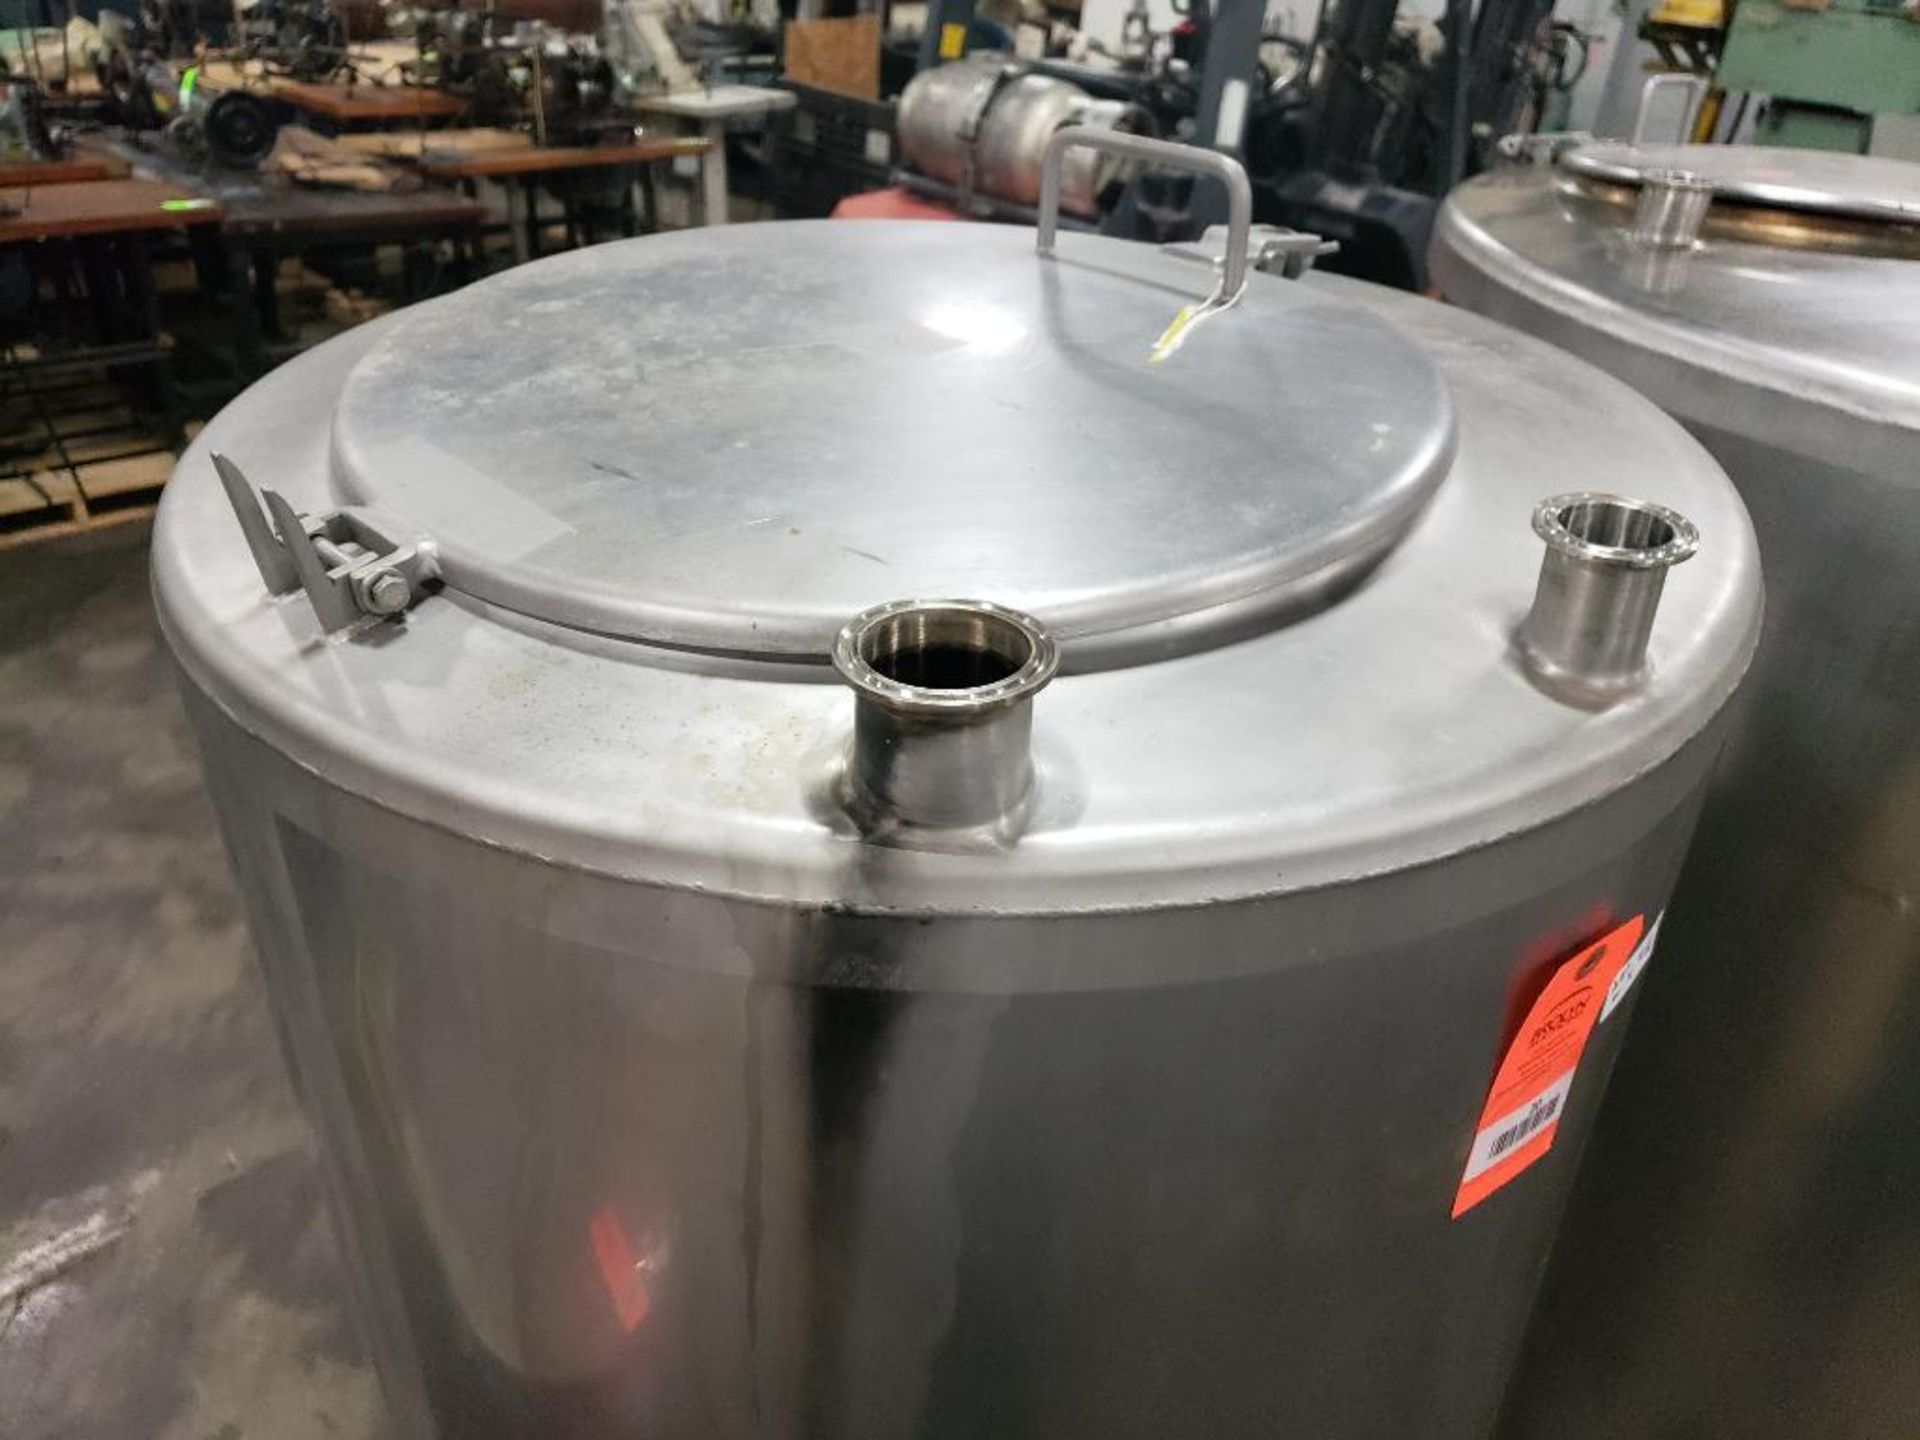 Approx 135 gallon Stainless steel holding tank. Approx dimensions 47in wide by 48in tall. - Image 7 of 9